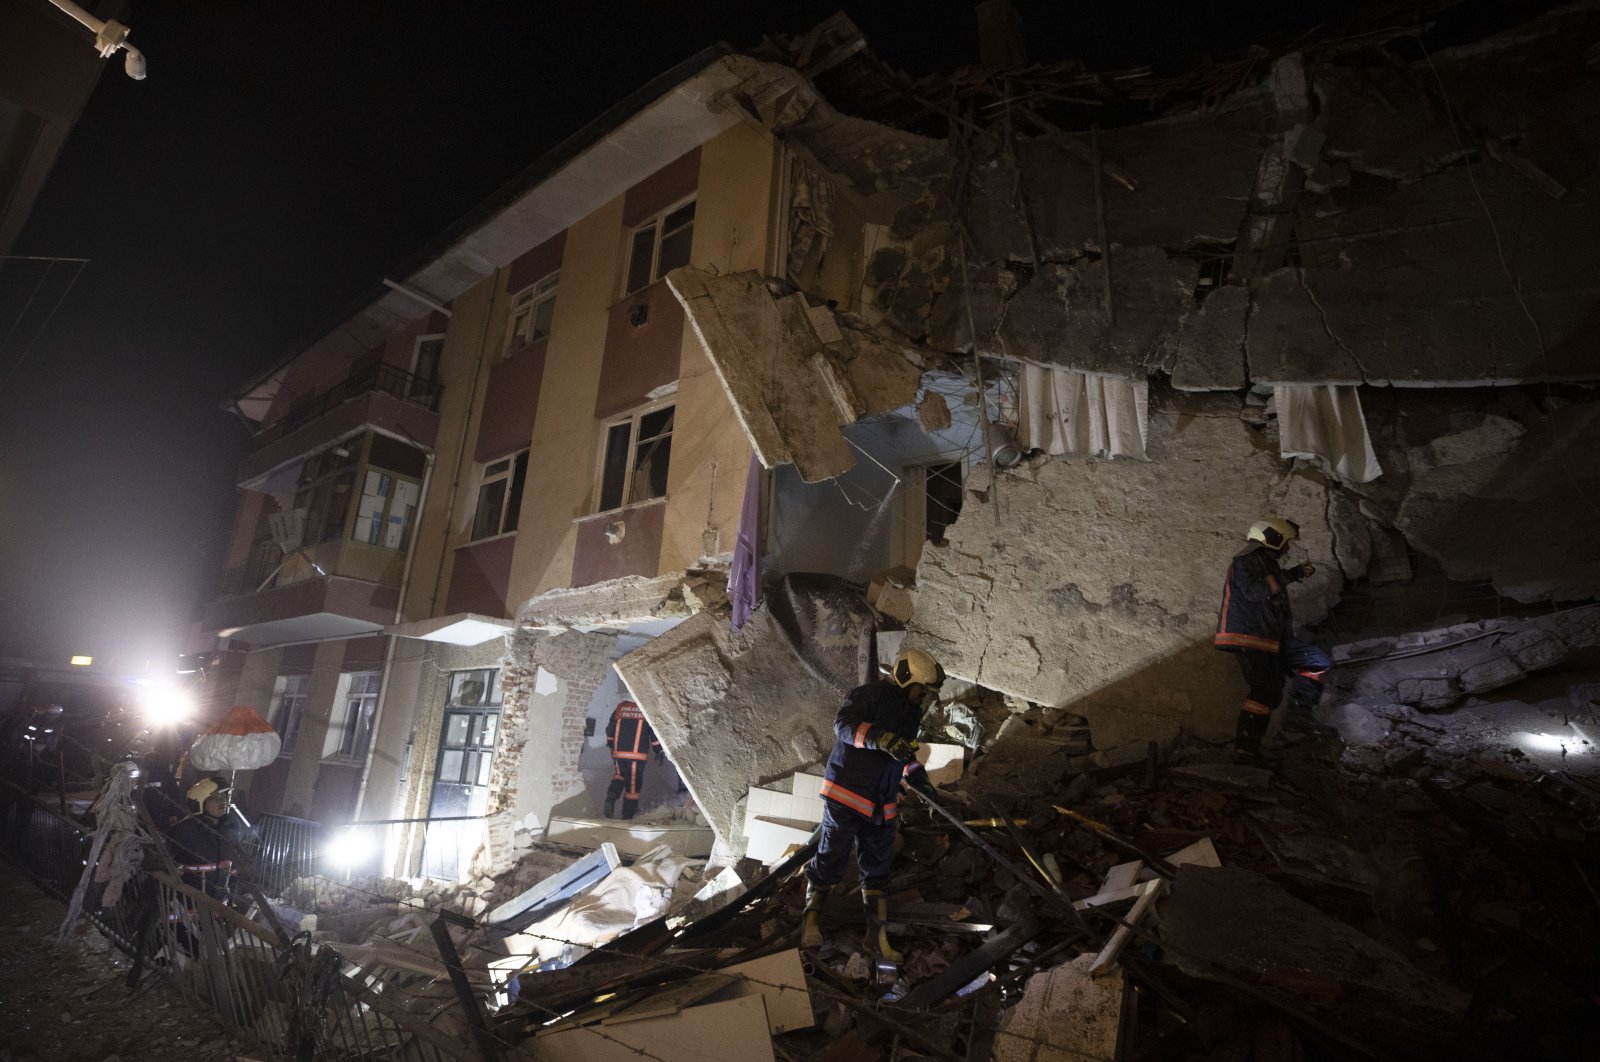 Rescue workers search through the debris for victims in Keçiören district, Ankara, Nov. 19, 2021. (AA Photo)